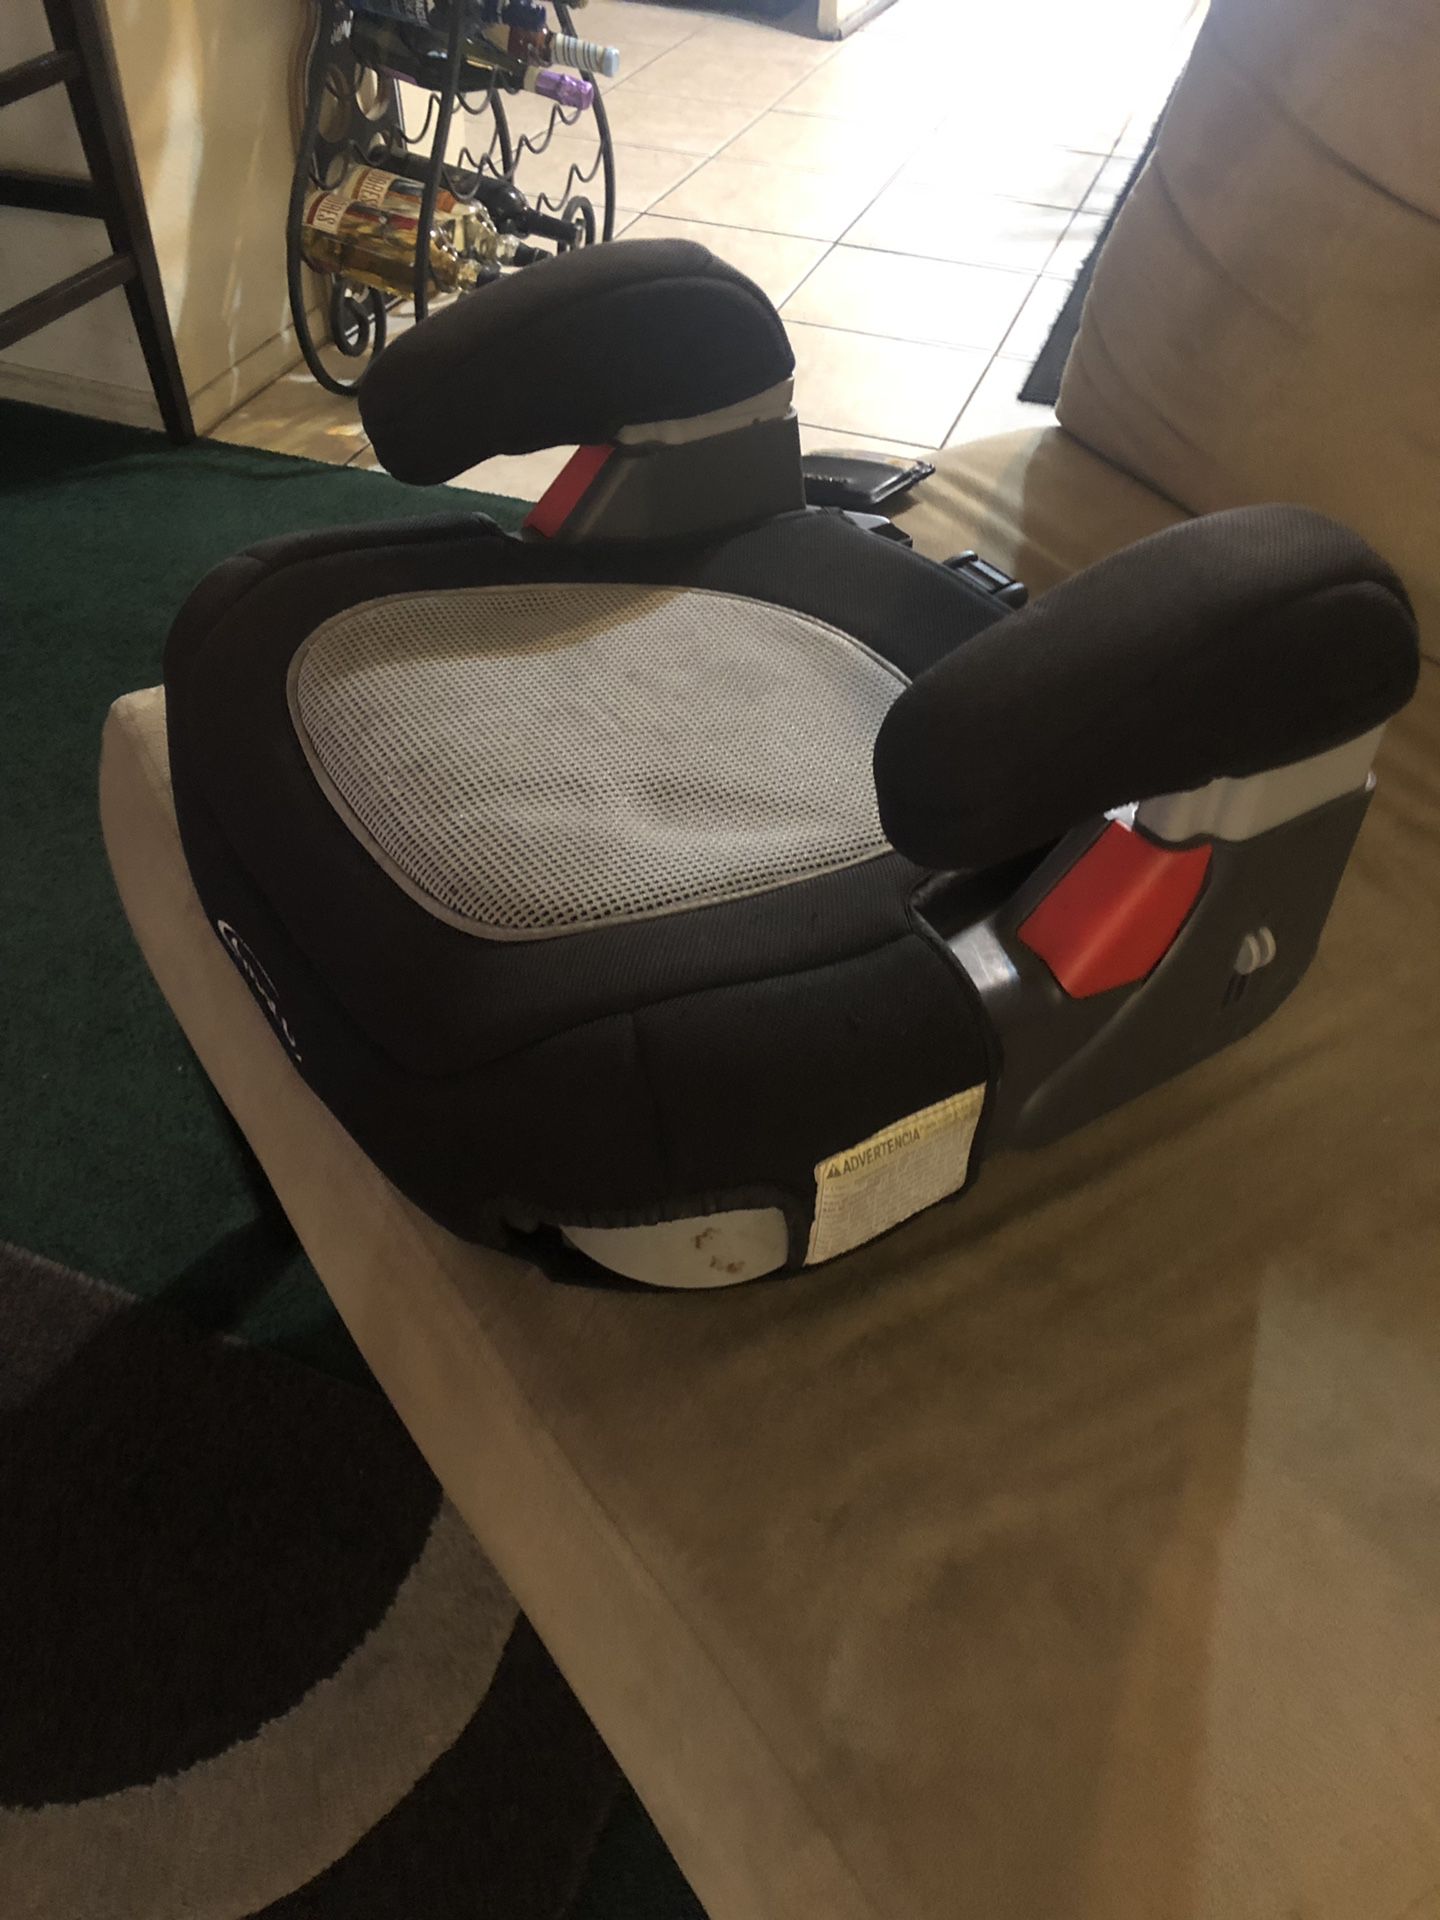 Backless Graco booster car seat